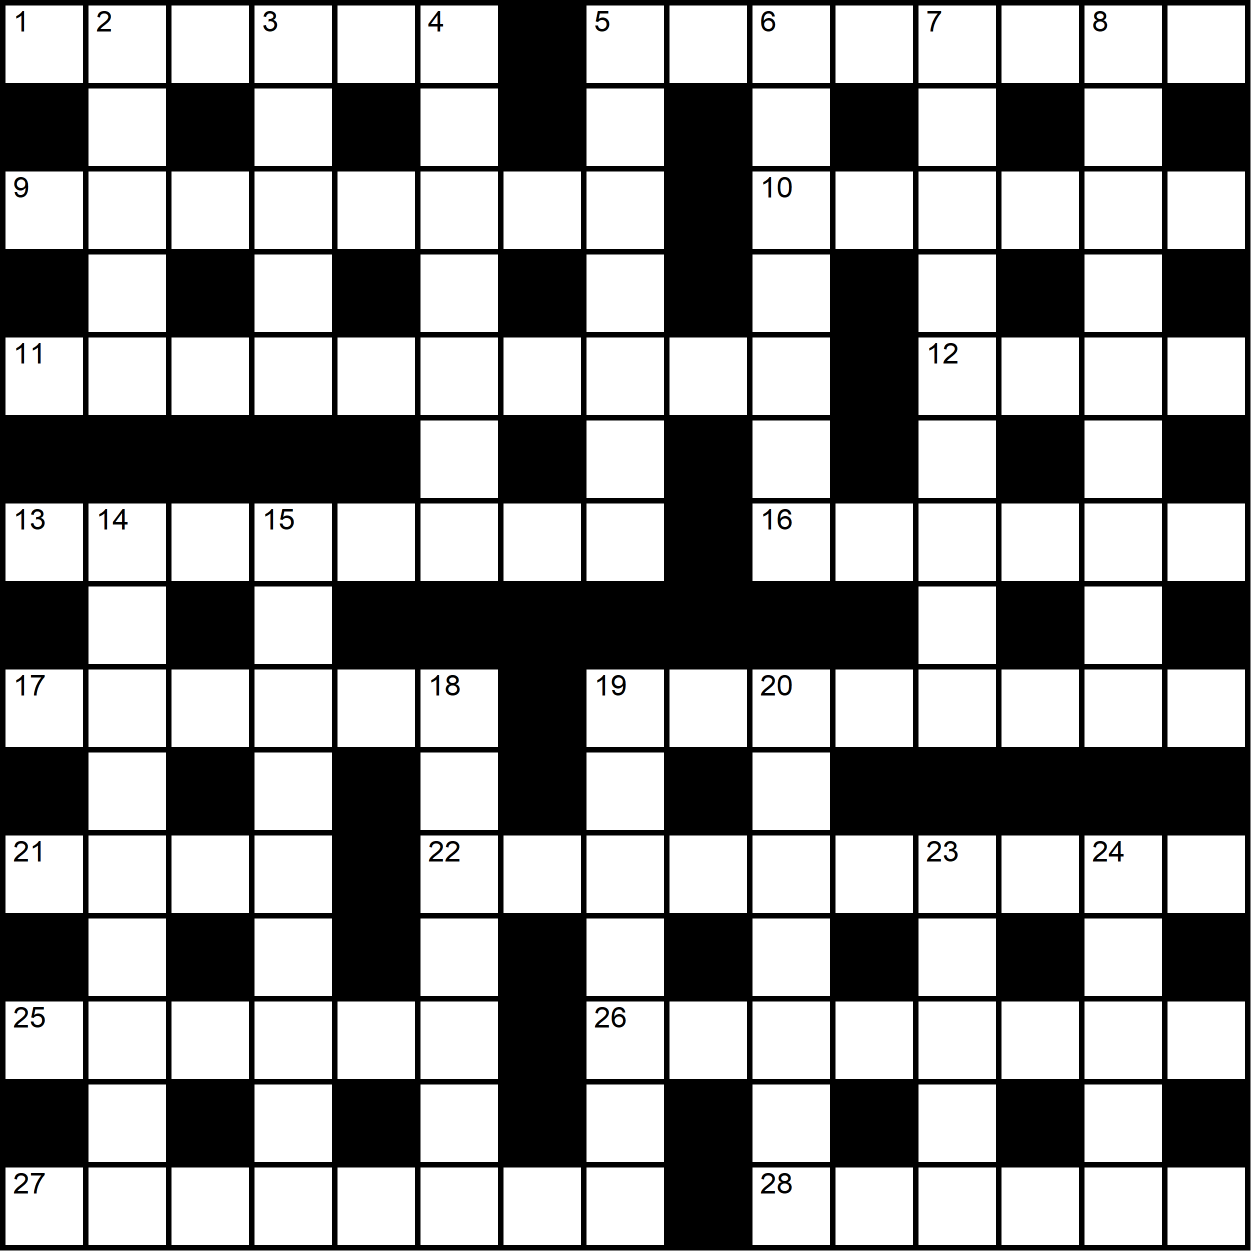 A 15x15 cryptic crossword grid.